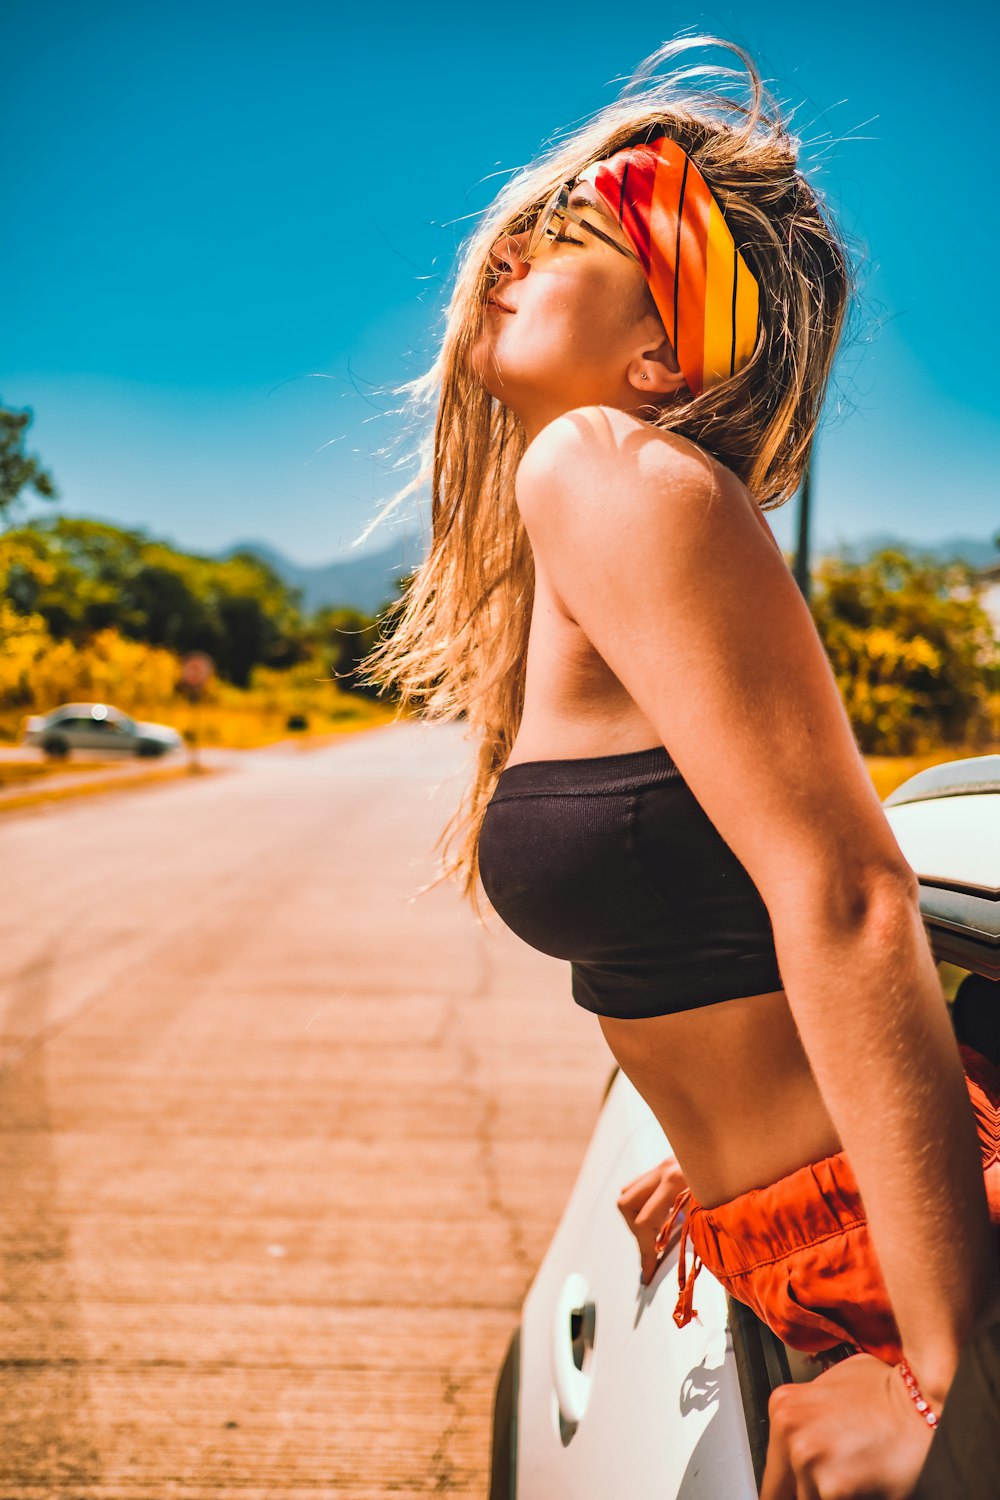 woman in black sports bra and black shorts standing on sidewalk during daytime